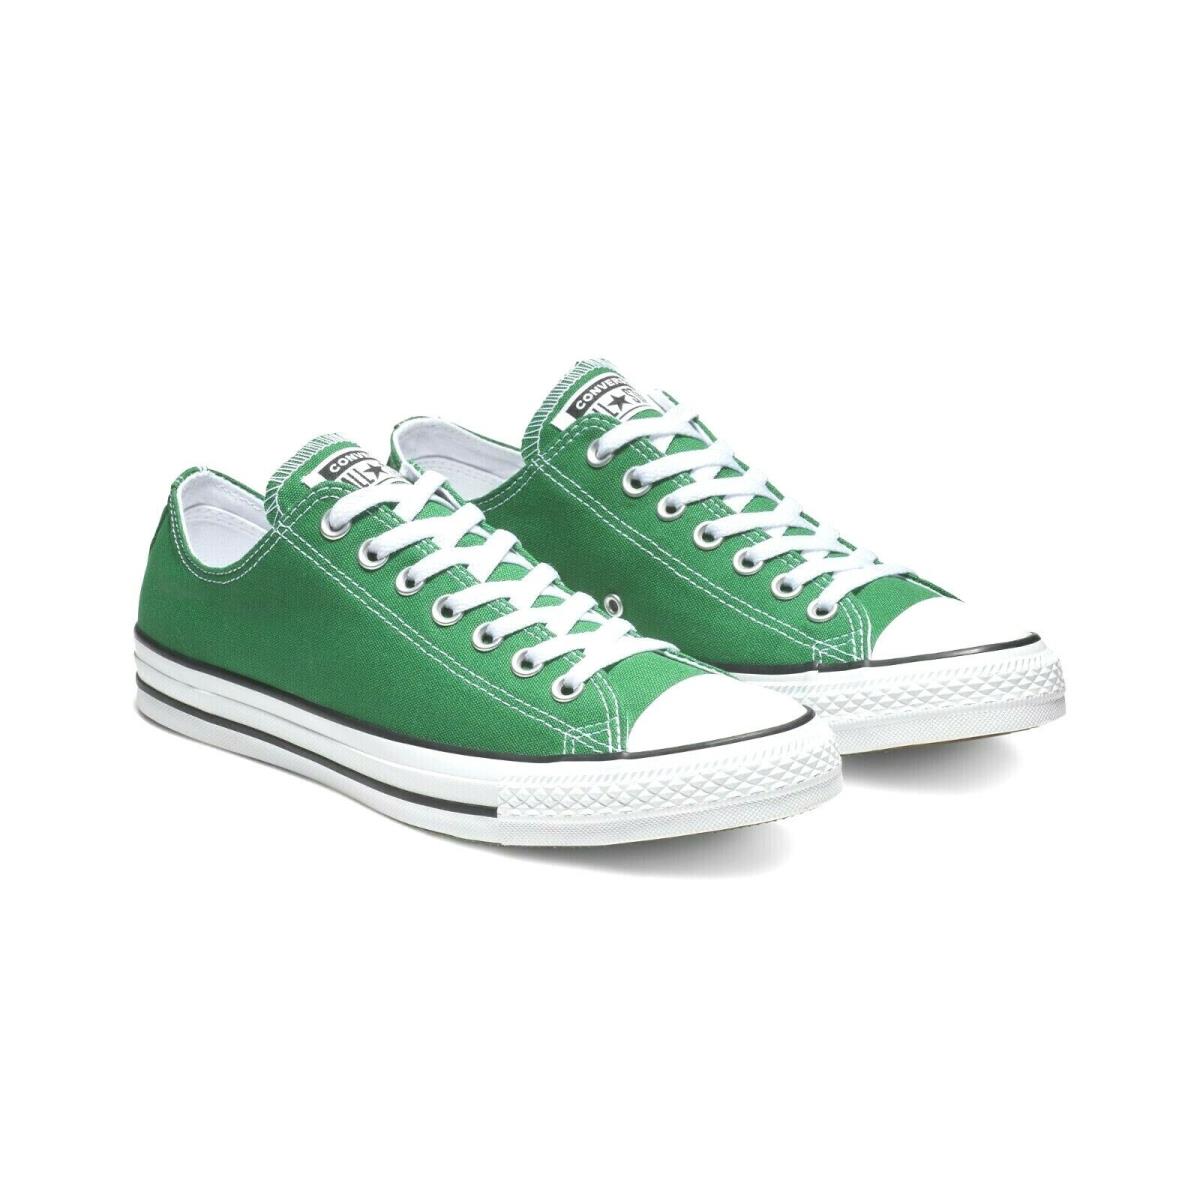 Classic Converse Unisex Chuck Taylor All Star Low Sneaker Canvas Upper Mens Size Green